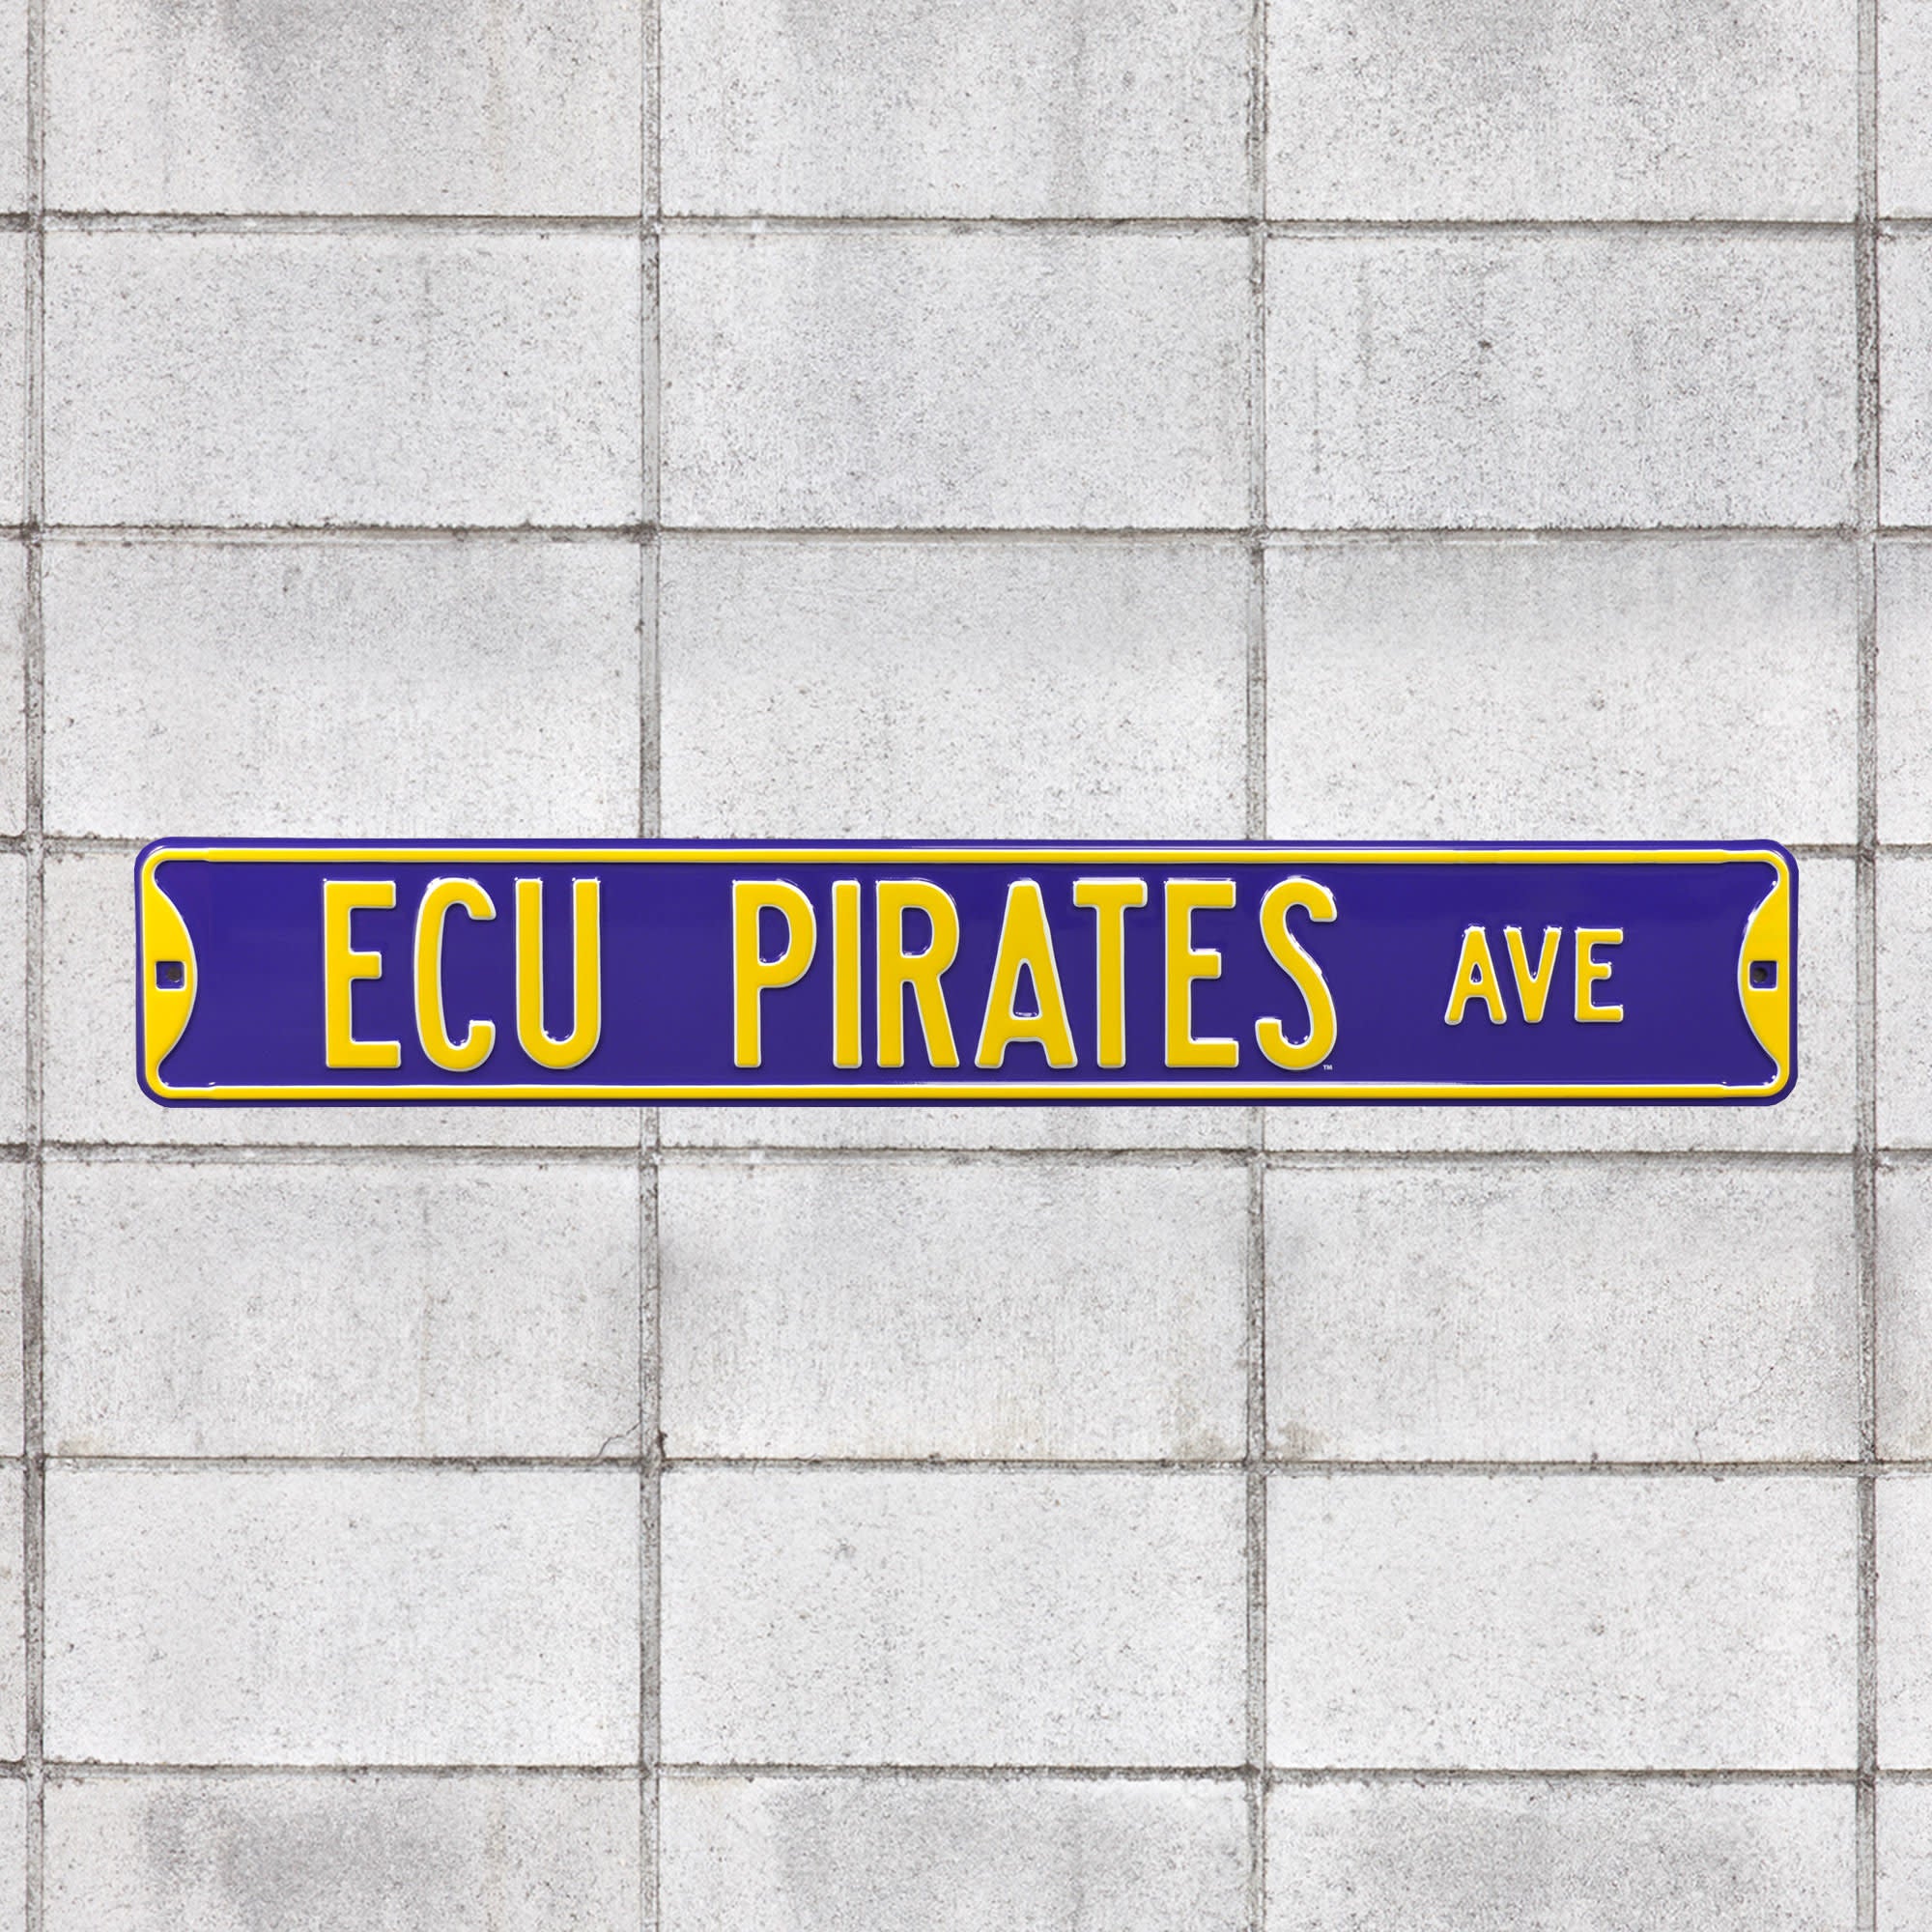 East Carolina Pirates: East Carolina Pirates Avenue - Officially Licensed Metal Street Sign 36.0"W x 6.0"H by Fathead | 100% Ste